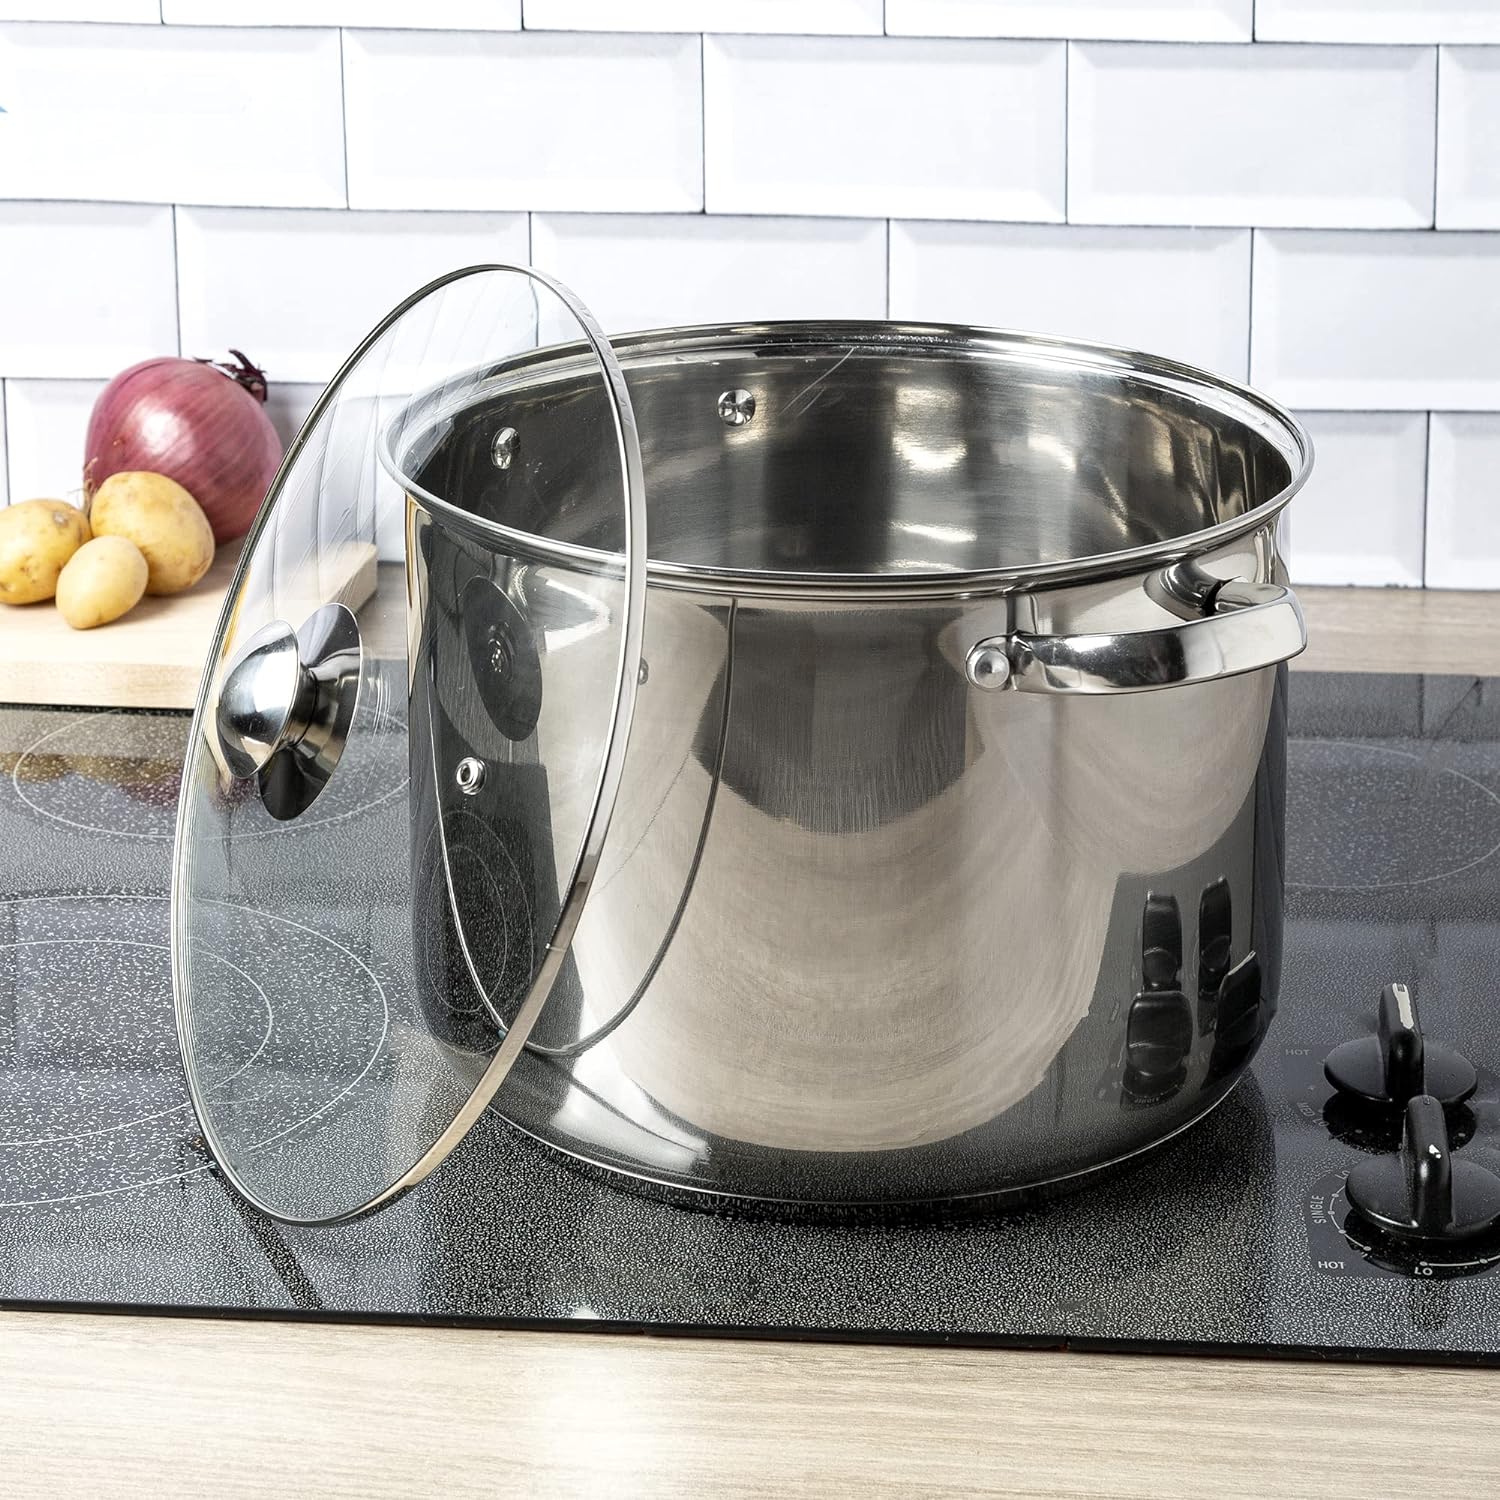 https://bigbigmart.com/wp-content/uploads/2023/11/Ecolution-Stainless-Steel-Stock-Pot-with-Encapsulated-Bottom-Matching-Tempered-Glass-Steam-Vented-Lids-Made-Without-PFOA-Dishwasher-Safe-12-Quart-Silver9.jpg